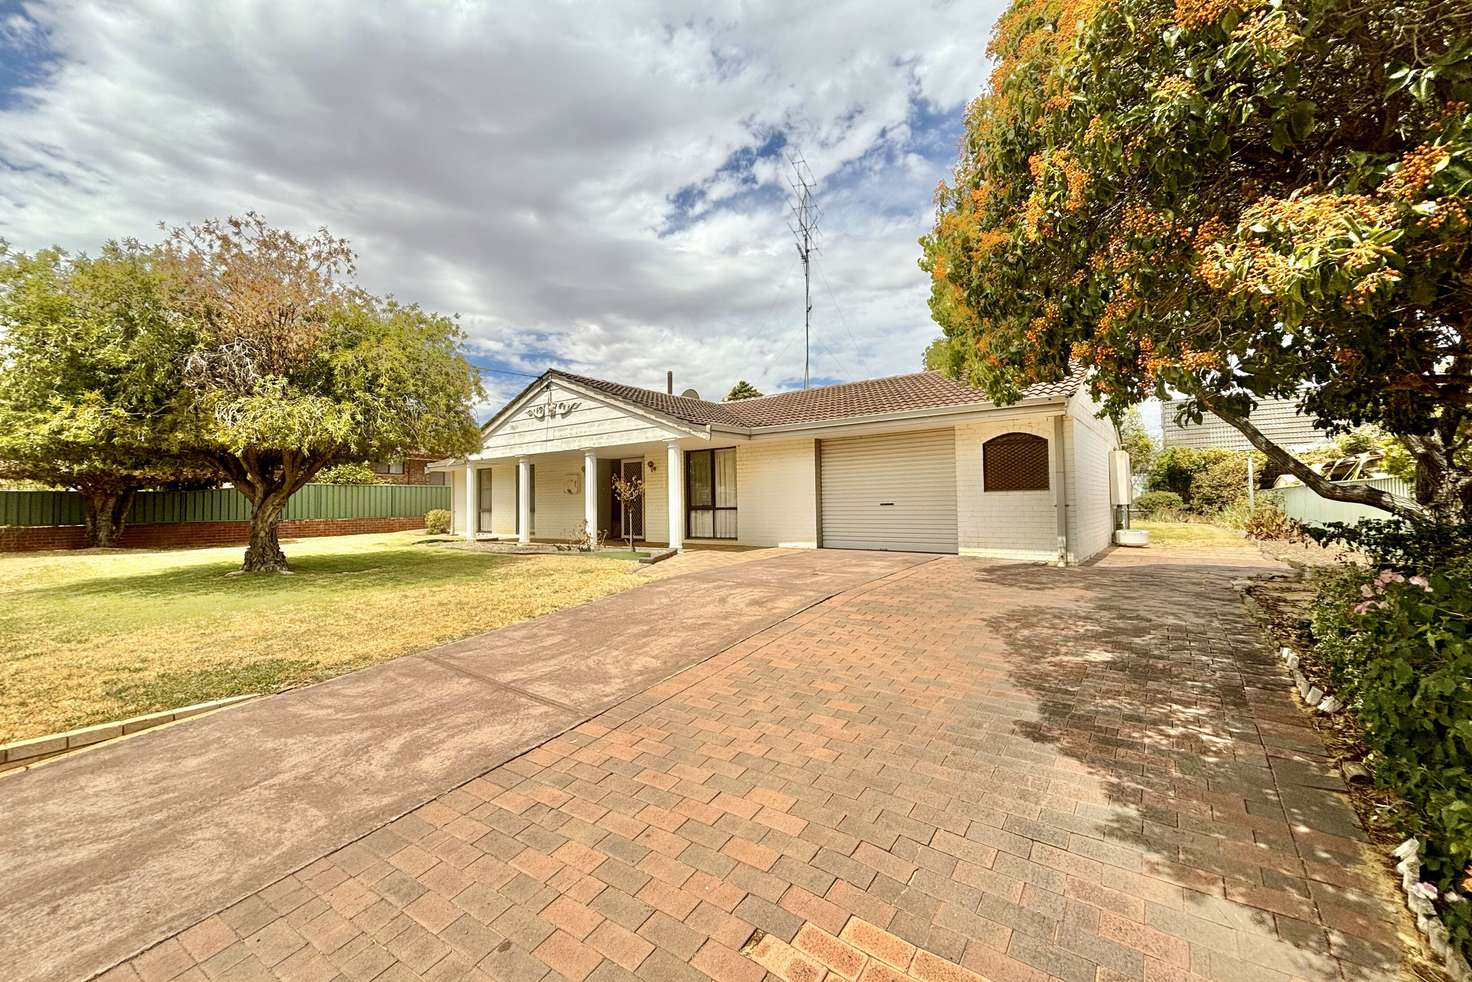 Main view of Homely house listing, 39 Quinlan St, Wongan Hills WA 6603